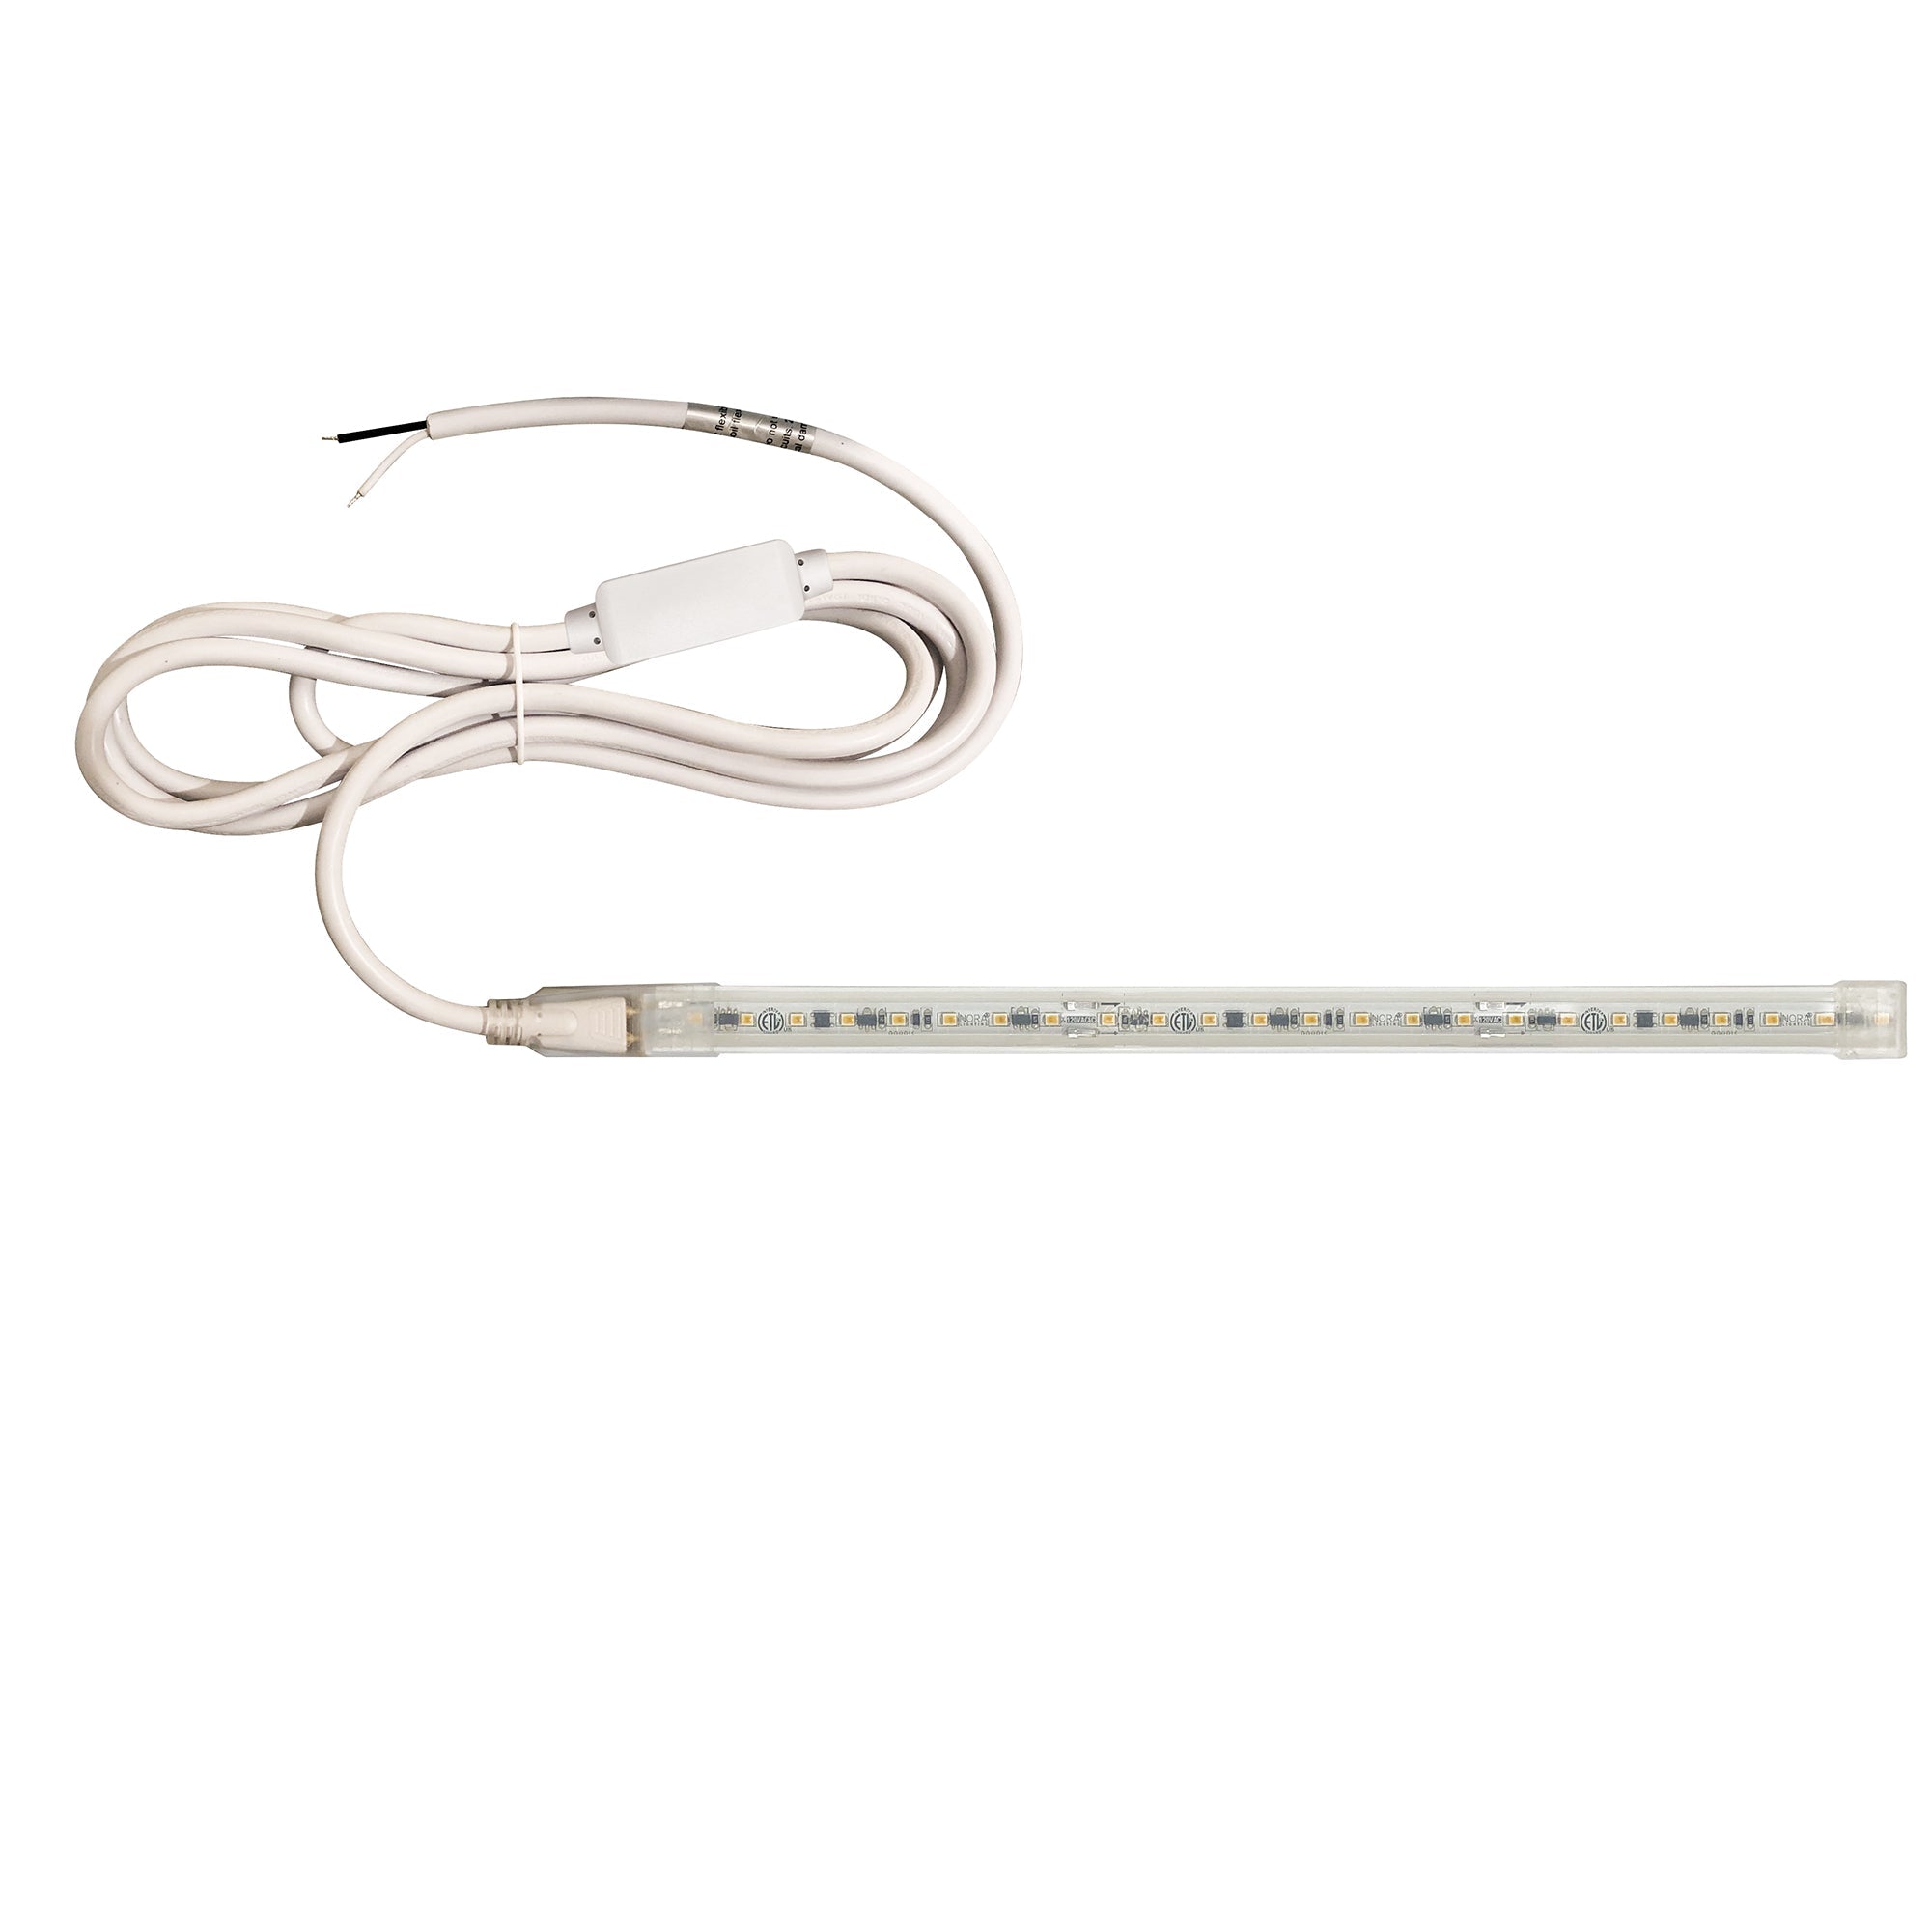 Nora Lighting NUTP13-W112-12-930/HWSP - Accent / Undercabinet - Custom Cut 112-ft 120V Continuous LED Tape Light, 330lm / 3.6W per foot, 3000K, w/ Mounting Clips and 8' Hardwired Power Cord w/ Surge Protector